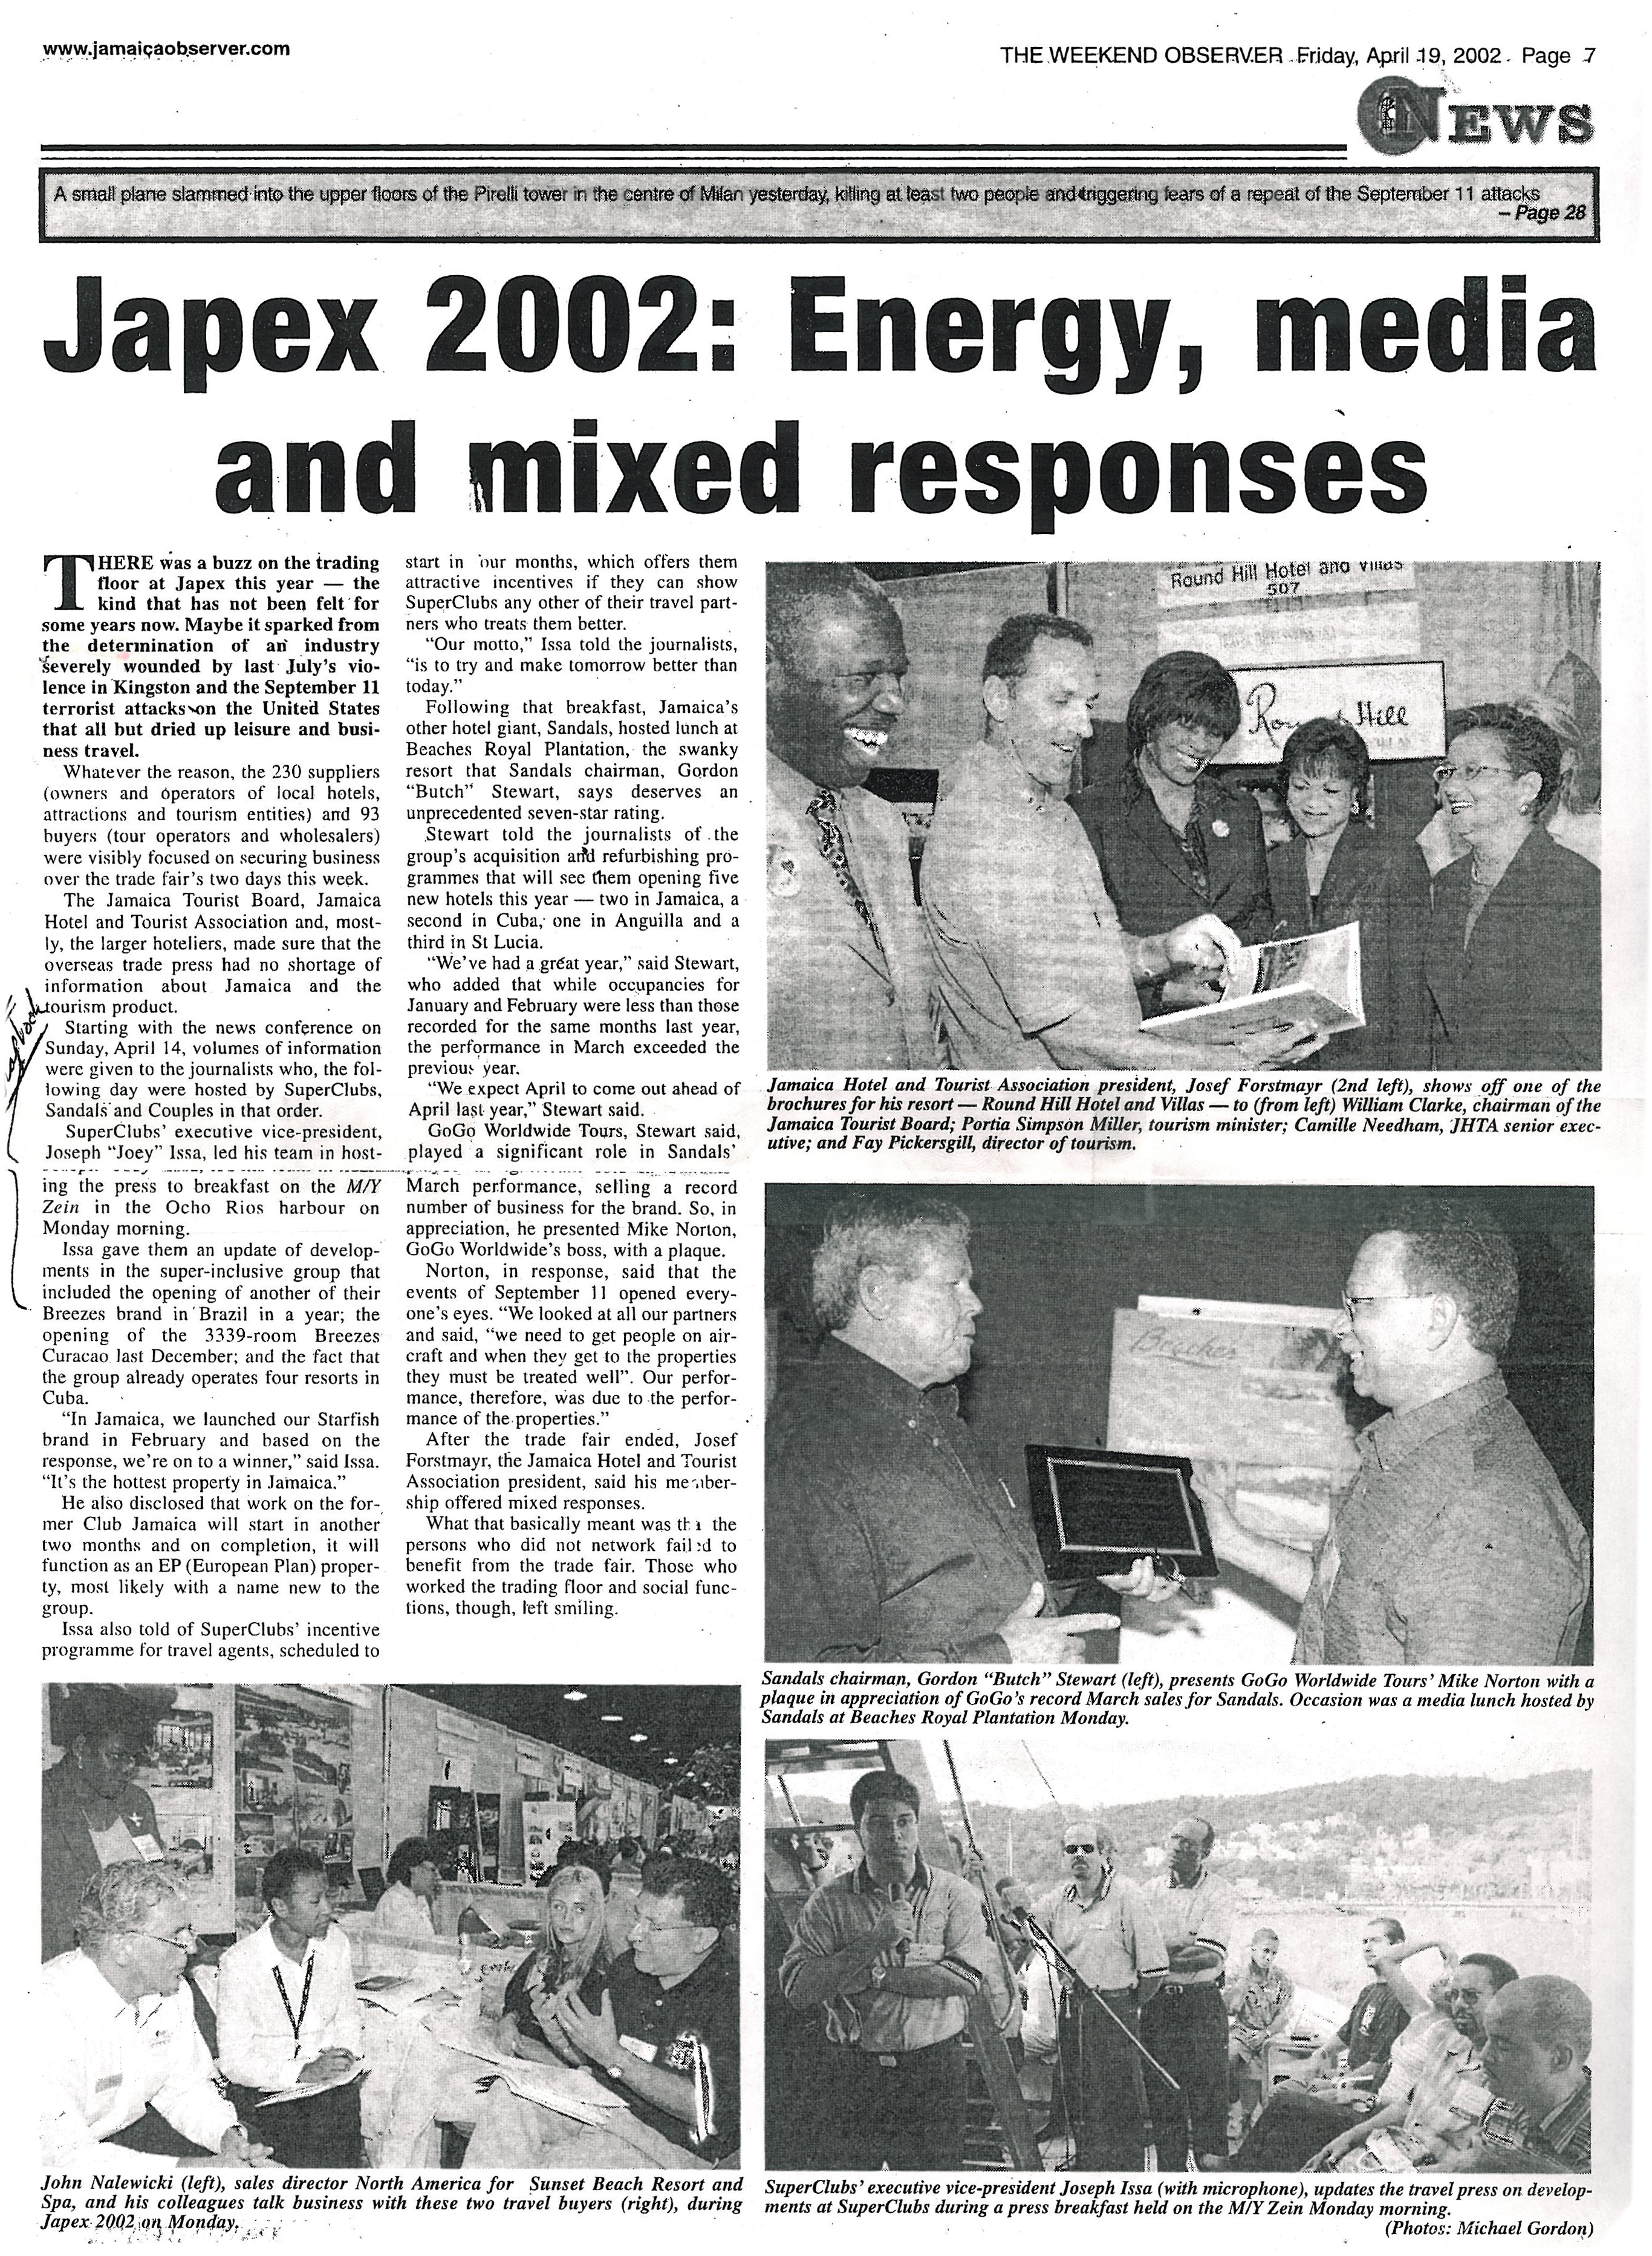 Japex 2002: Energy, media and mixed responses